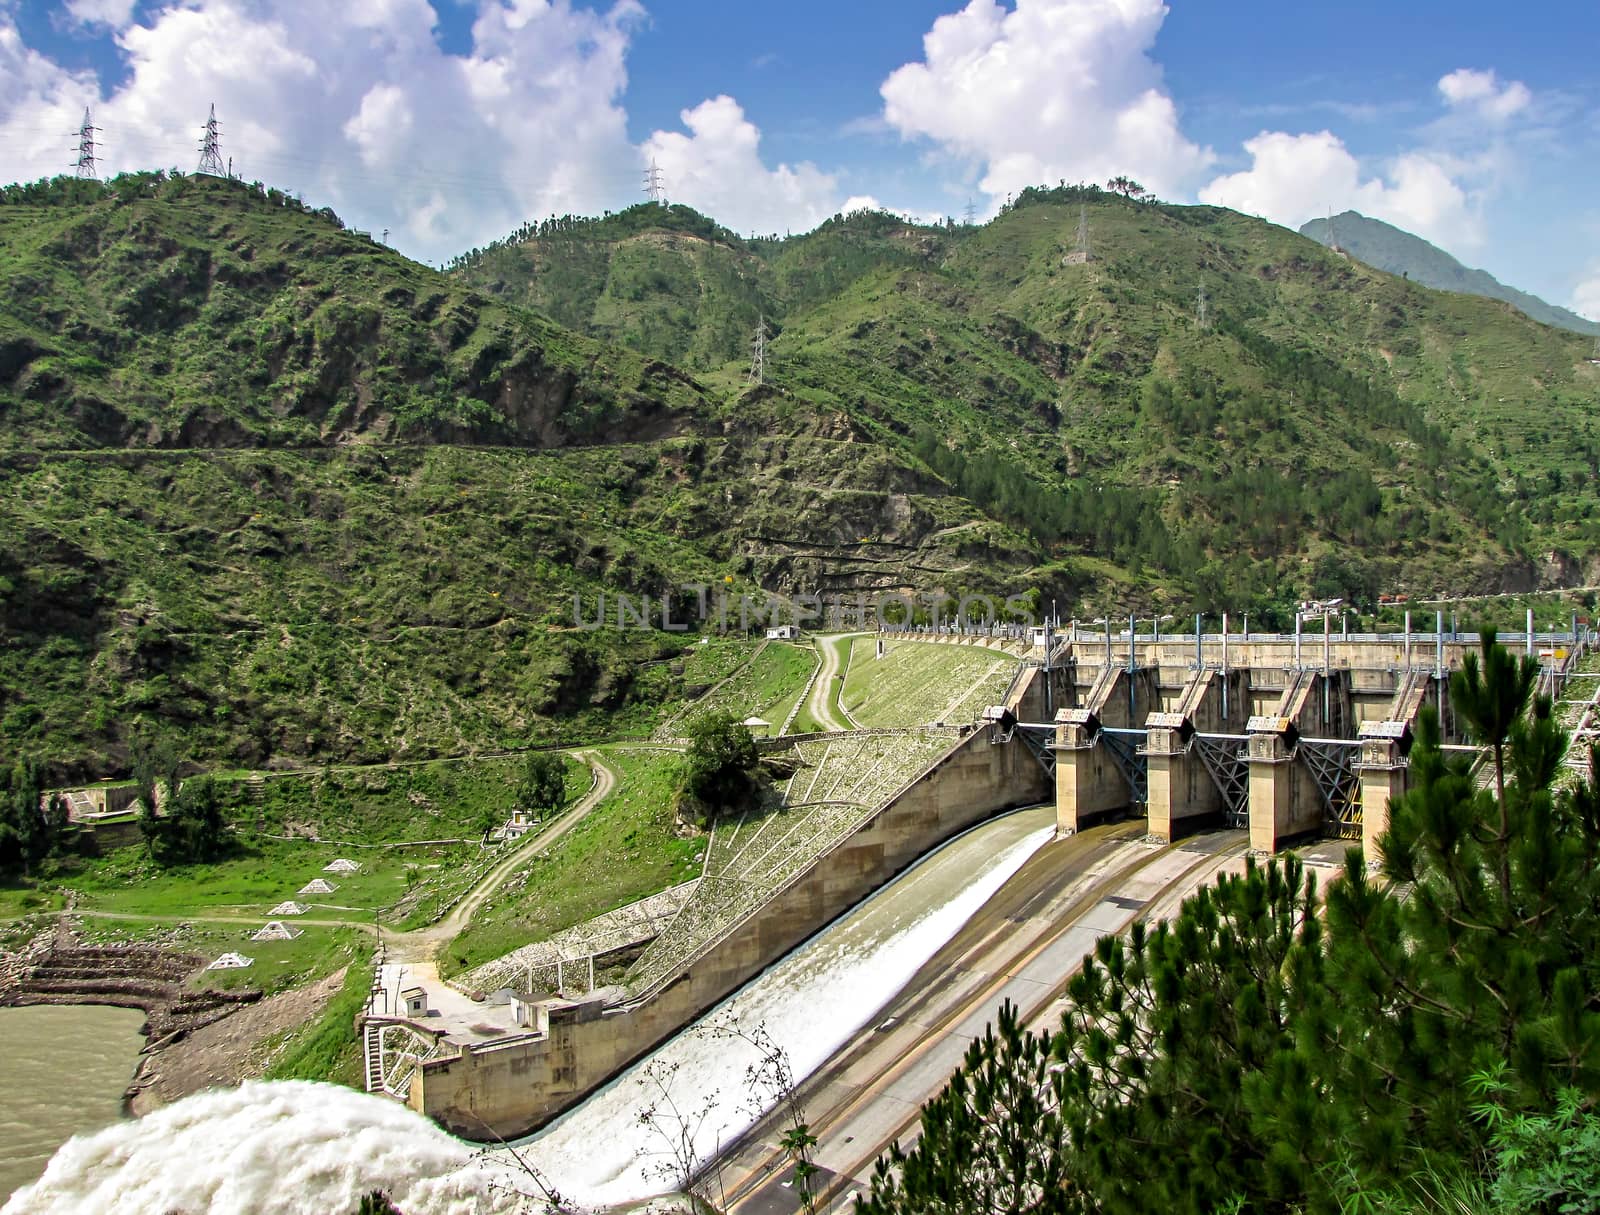 The Pandoh Dam is an embankment dam on the Beas River in Mandi district of Himachal Pradesh, India. by lalam